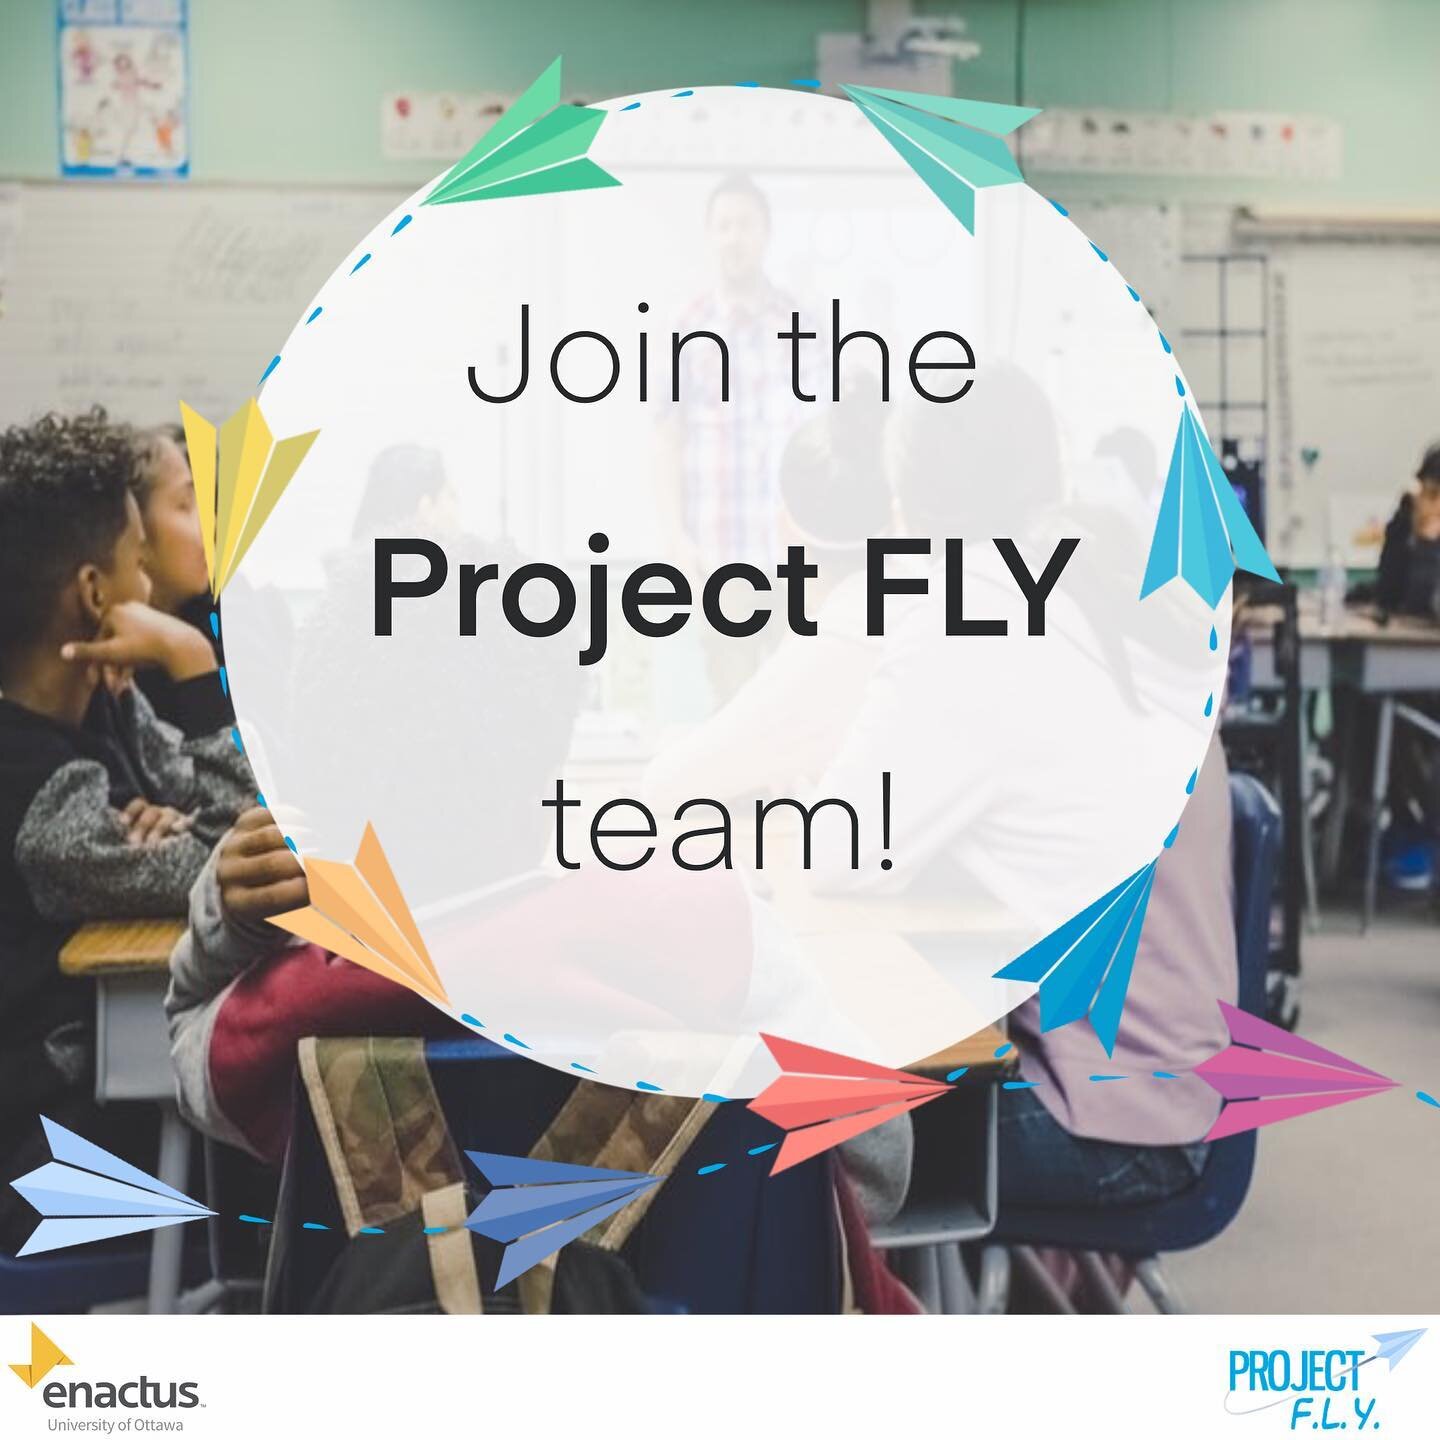 Hey UOttawa Students! Just a reminder that applications are still OPEN to join the Enactus UOttawa team for the 2020-2021 school year. Come join the Project FLY team and help empower youth across the region. 

Check out https://www.enactusuottawa.ca/